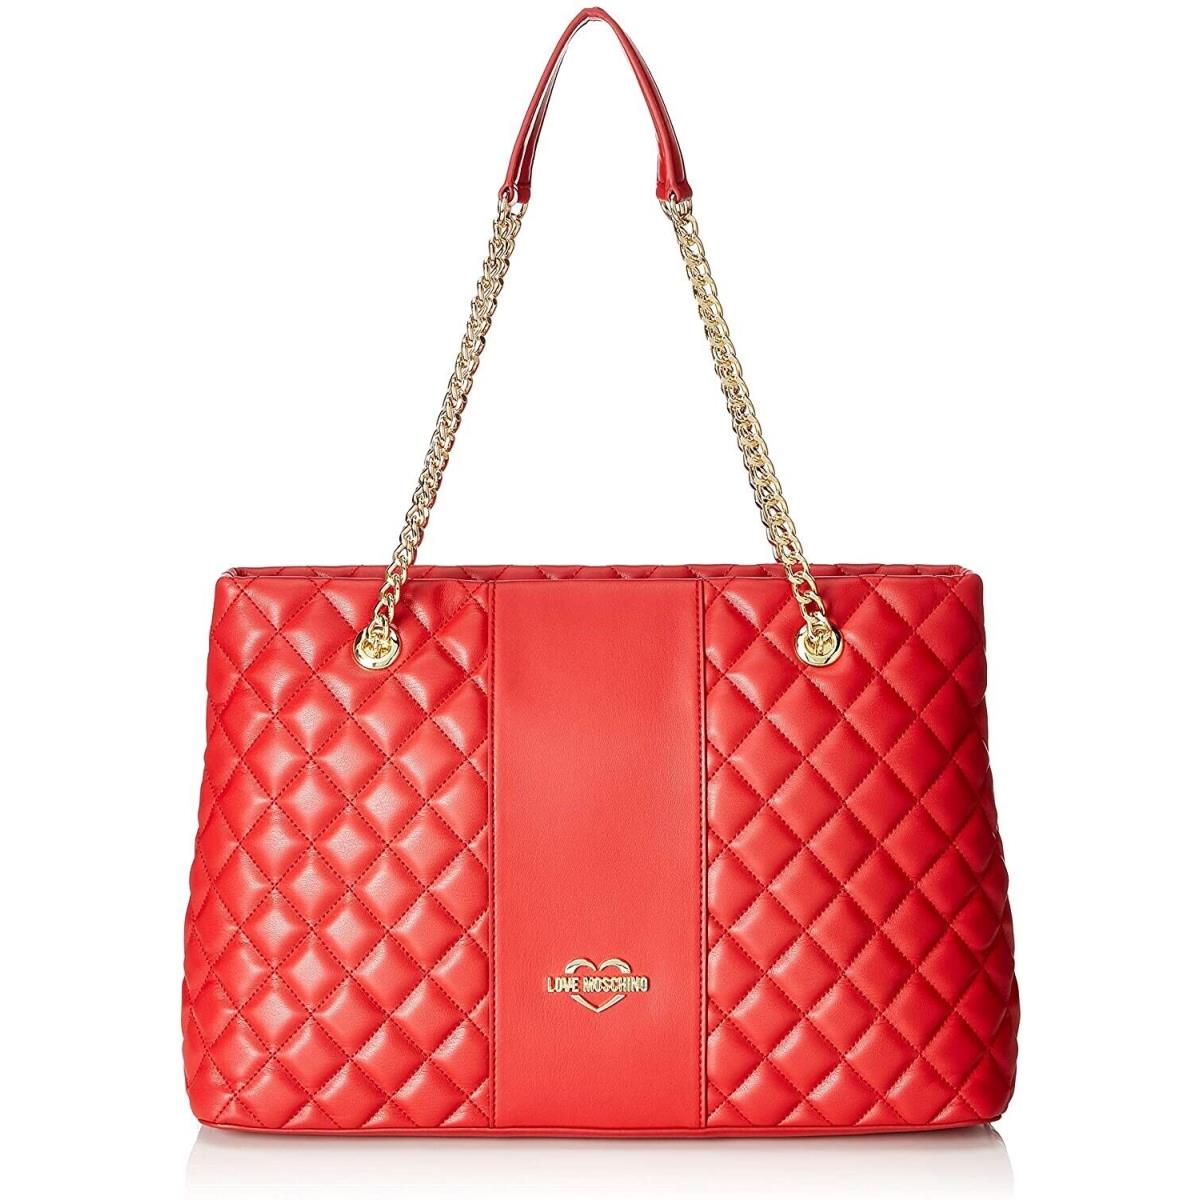 Love Moschino 187094 Womens Quilted Tote Bag Chain Strap Red/gold